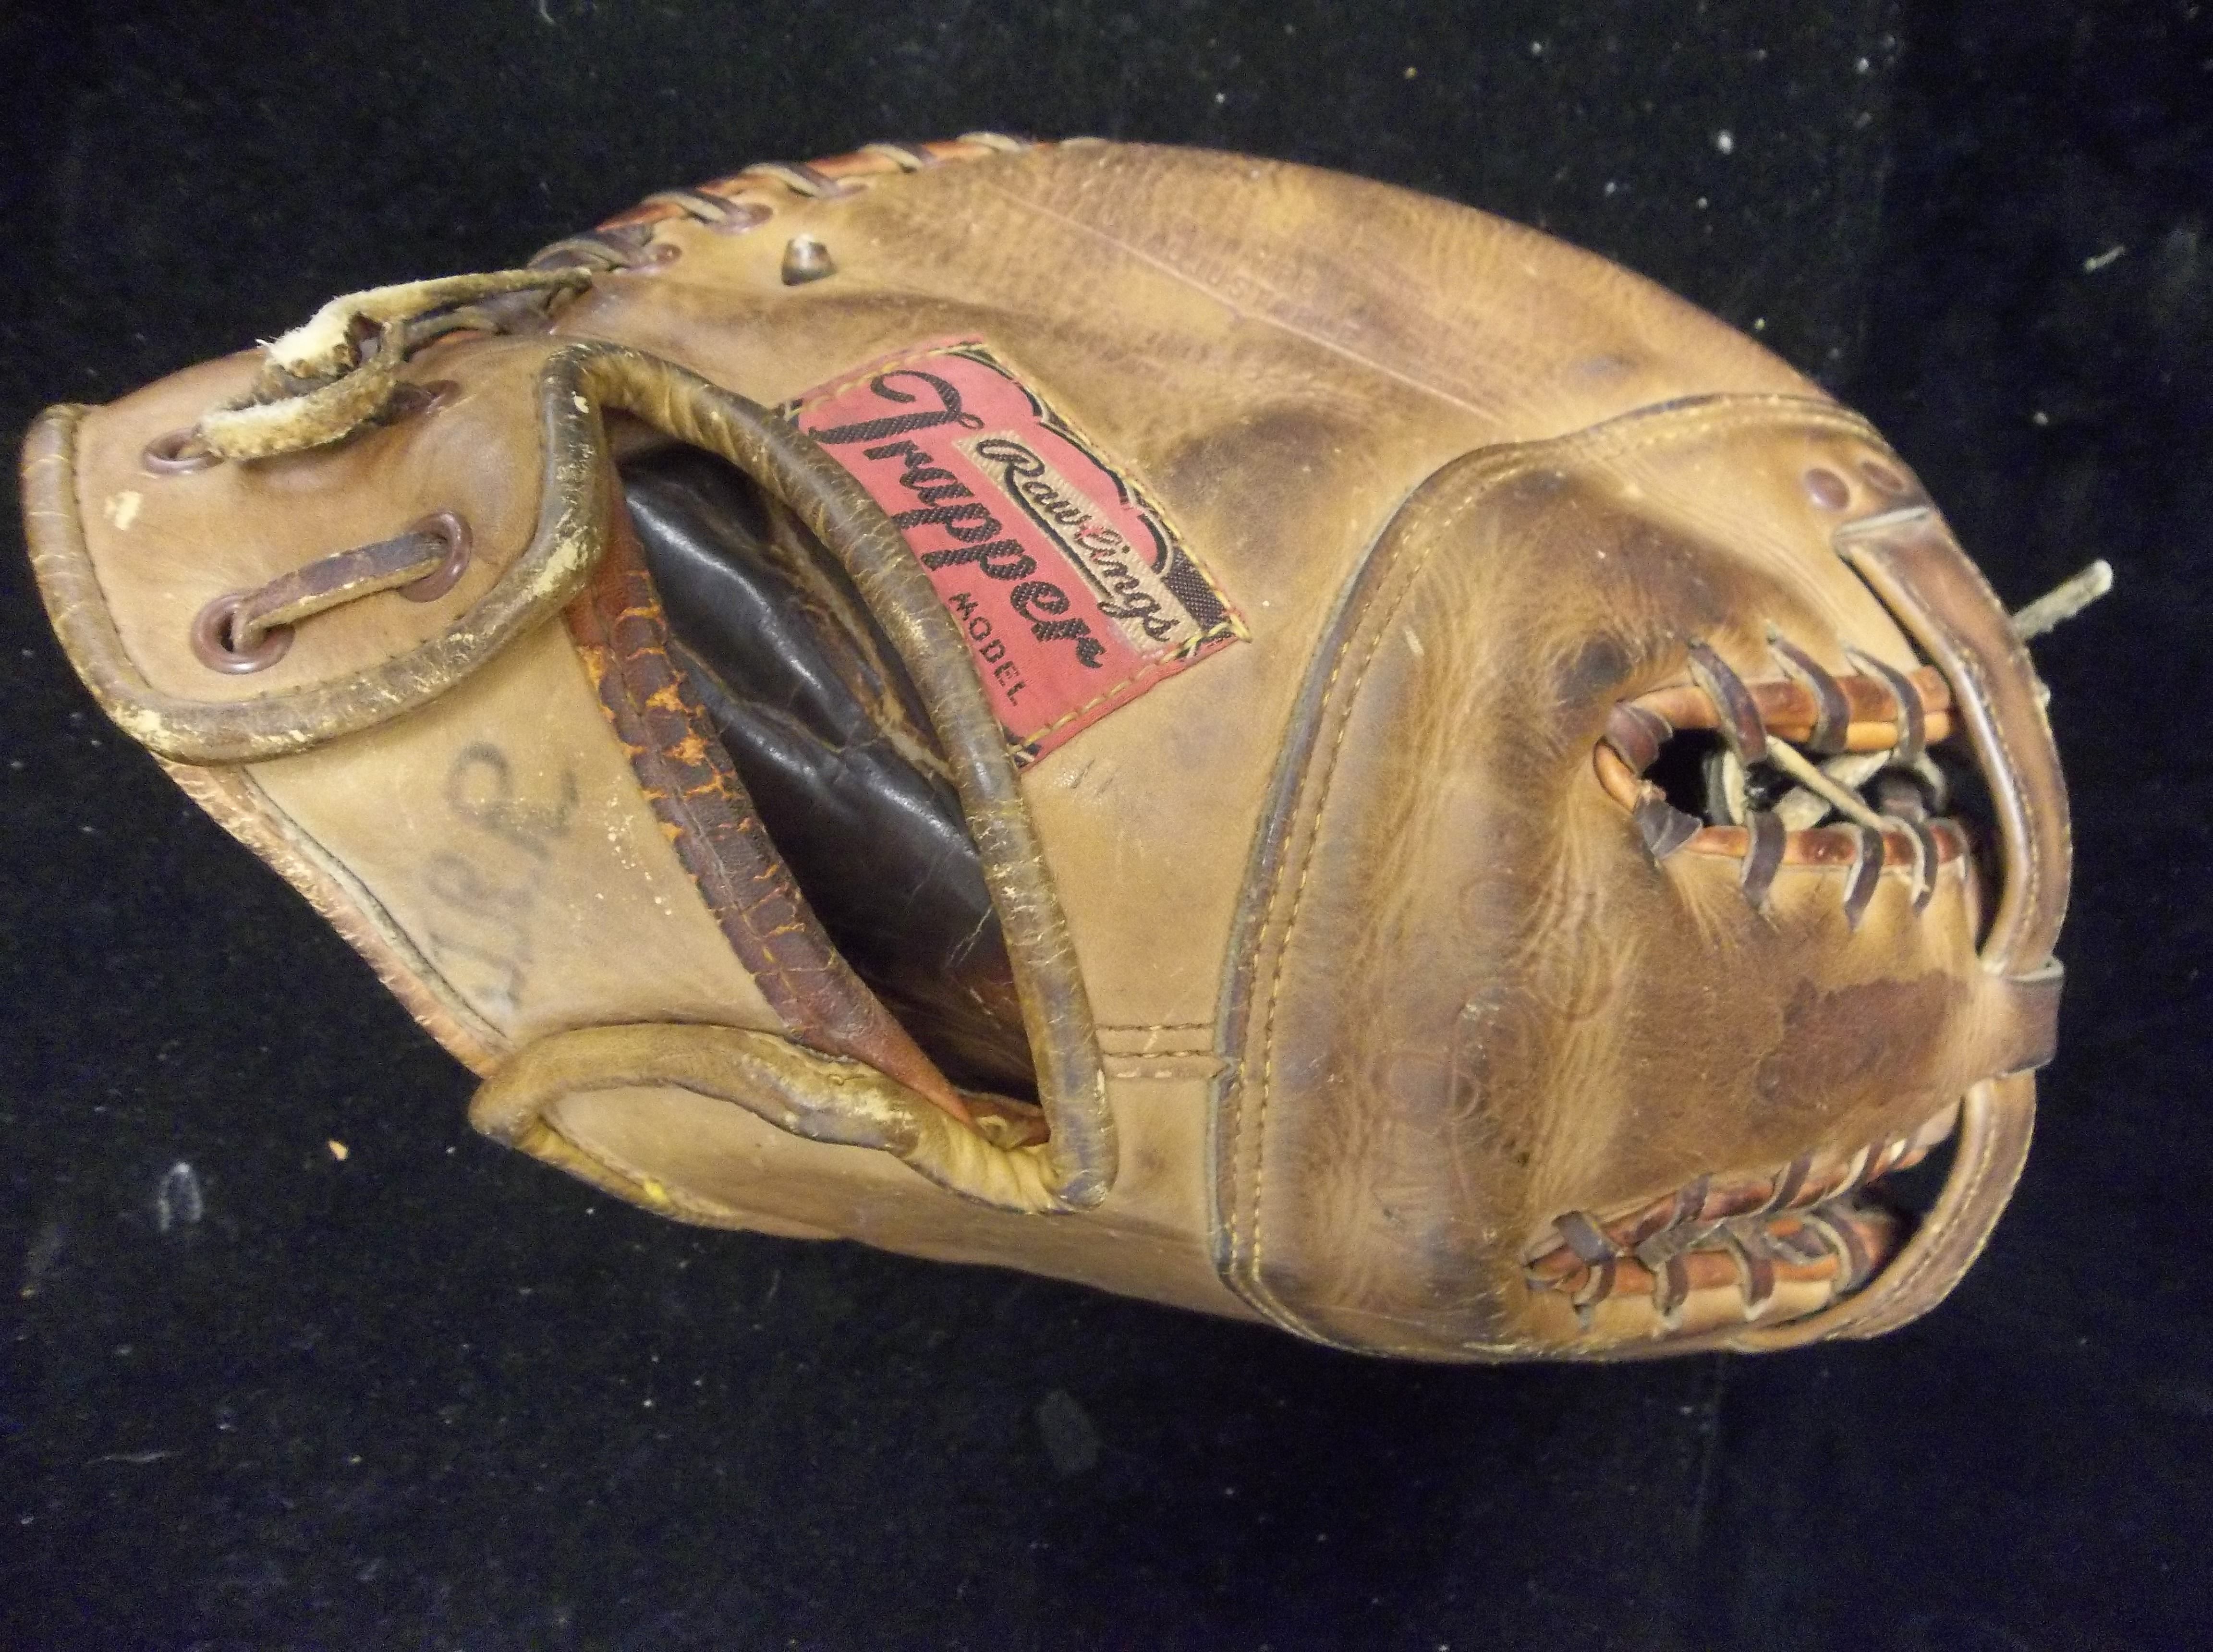 Sold at Auction: Vintage Rawlings Baseball Glove, Stan Musial